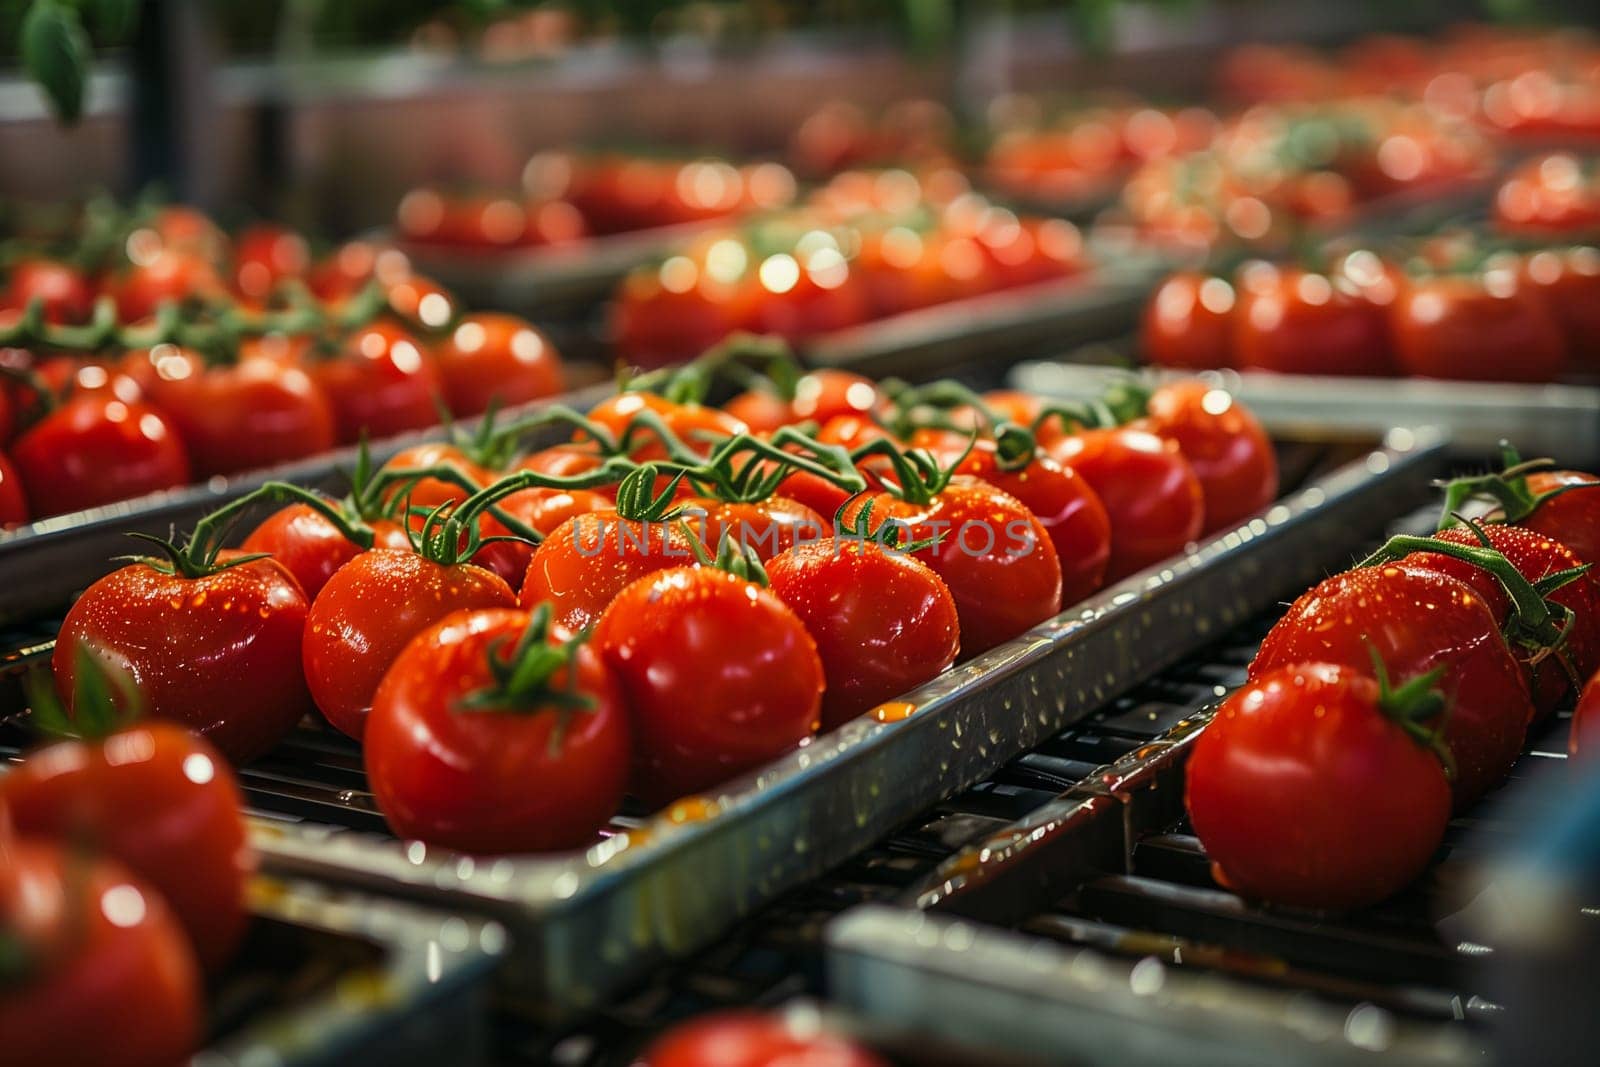 Row of Trays Filled With Red Tomatoes by Sd28DimoN_1976